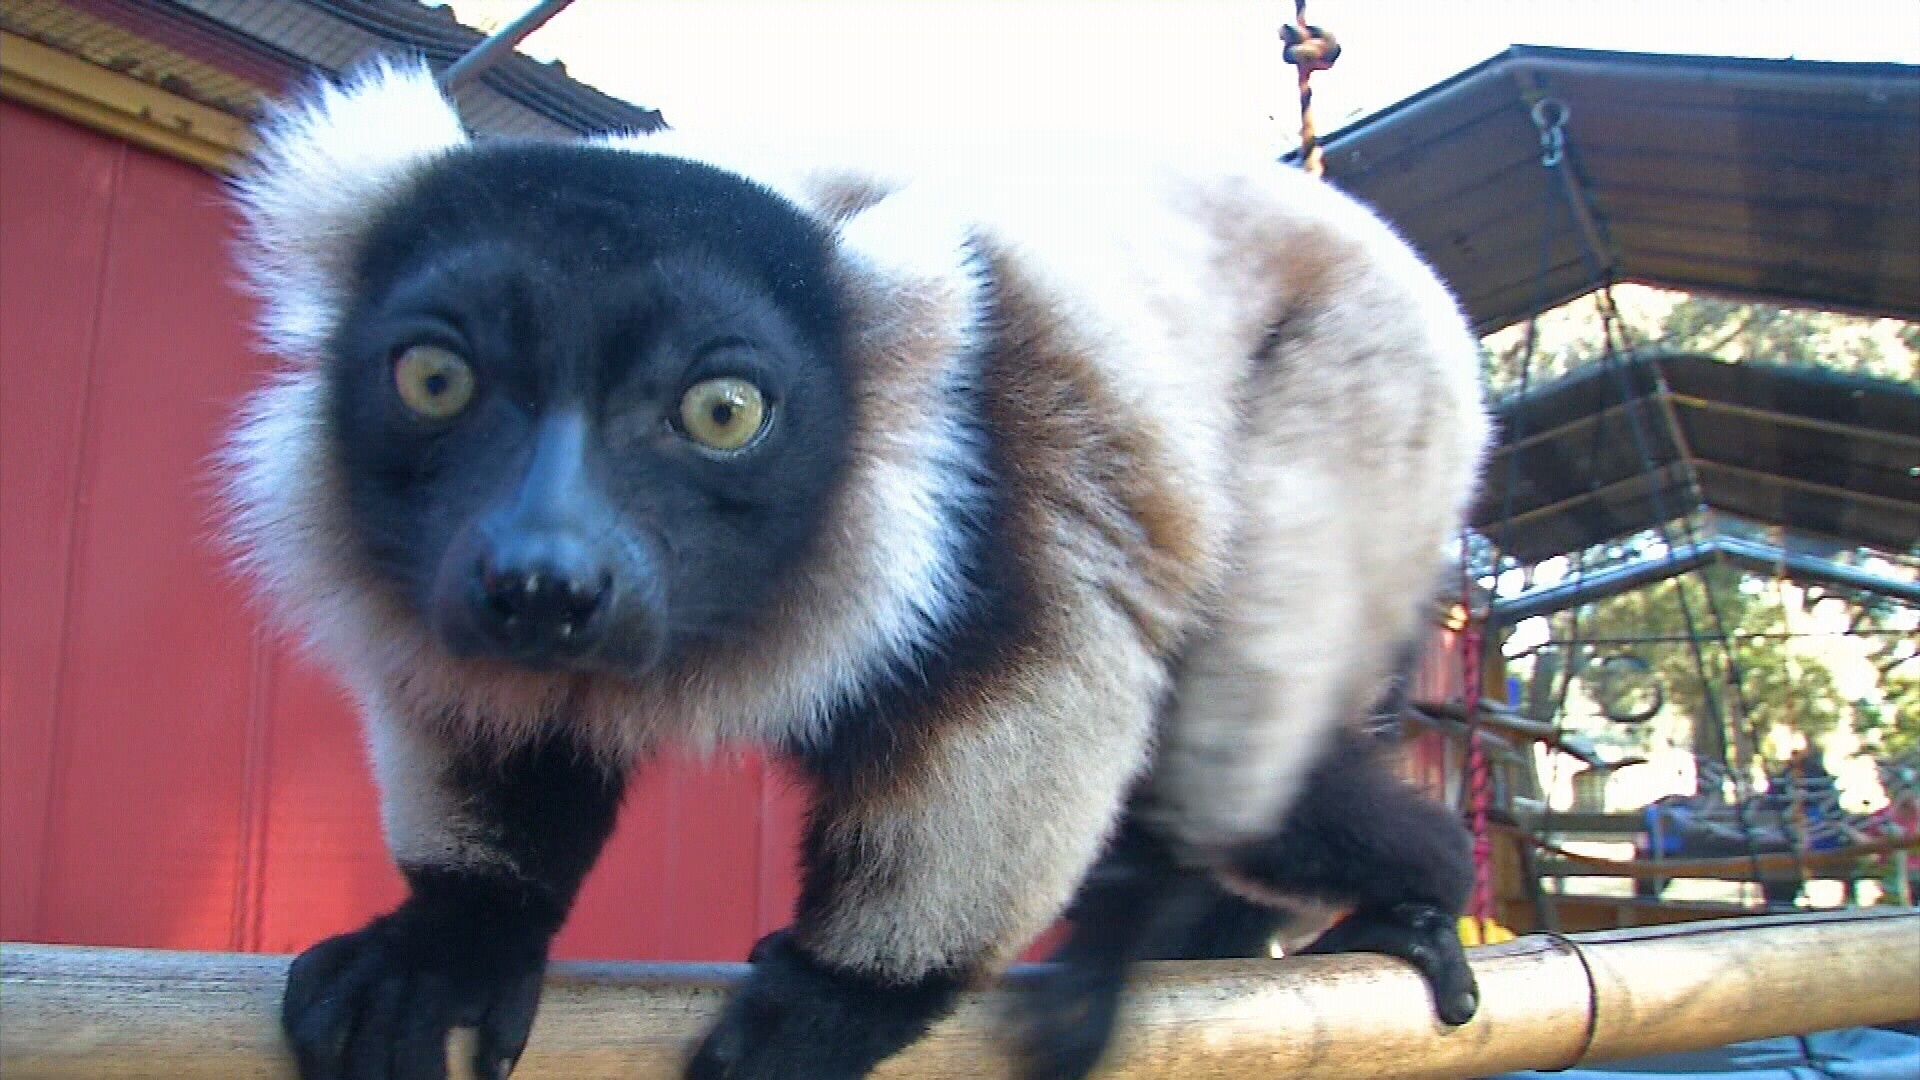 Chase Animal Rescue Sanctuary offers save haven for lemurs, exotic animals